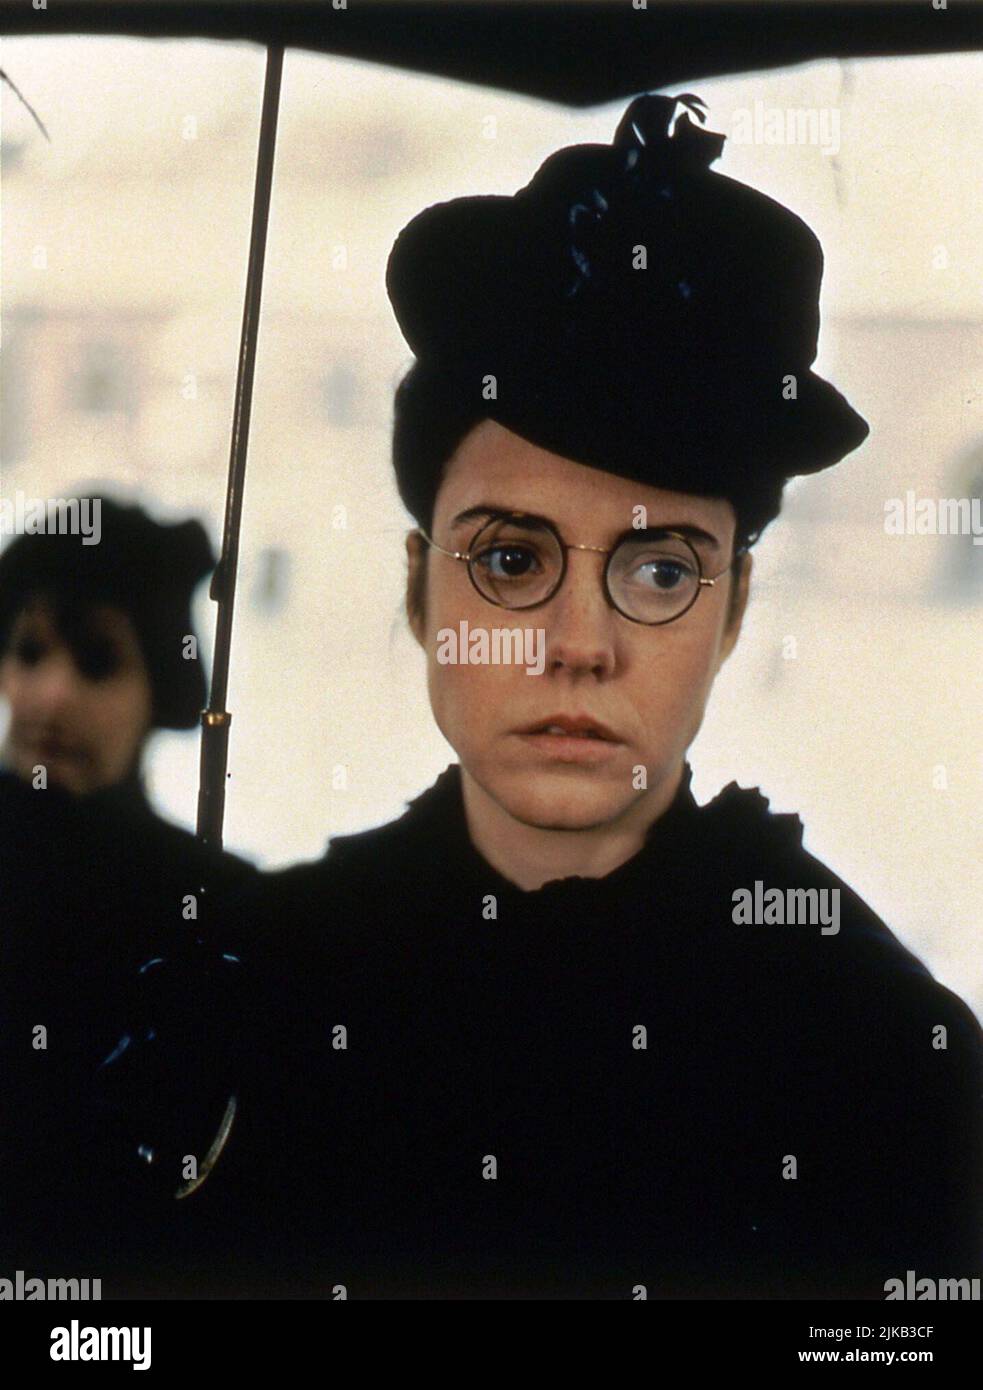 MARY-LOUISE PARKER in THE PORTRAIT OF A LADY (1996), directed by JANE CAMPION. Credit: PROPAGANDA FILMS / Album Stock Photo